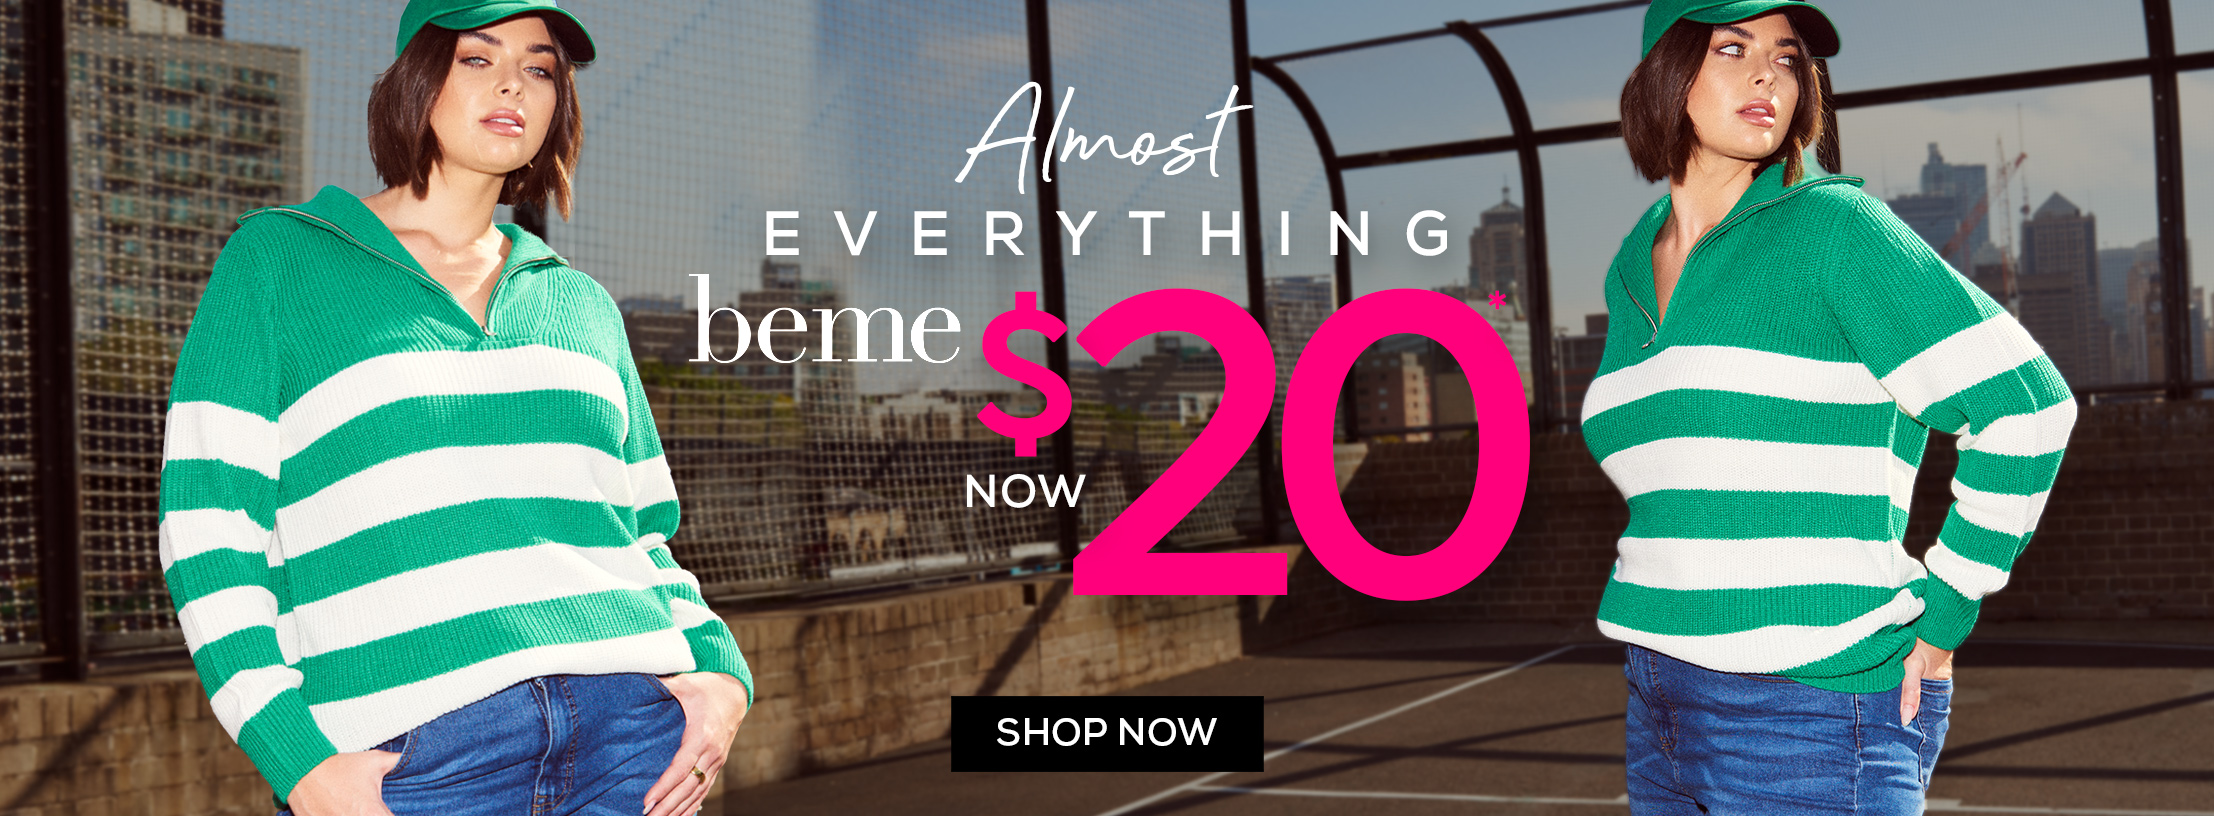 Almost Everything Beme $20